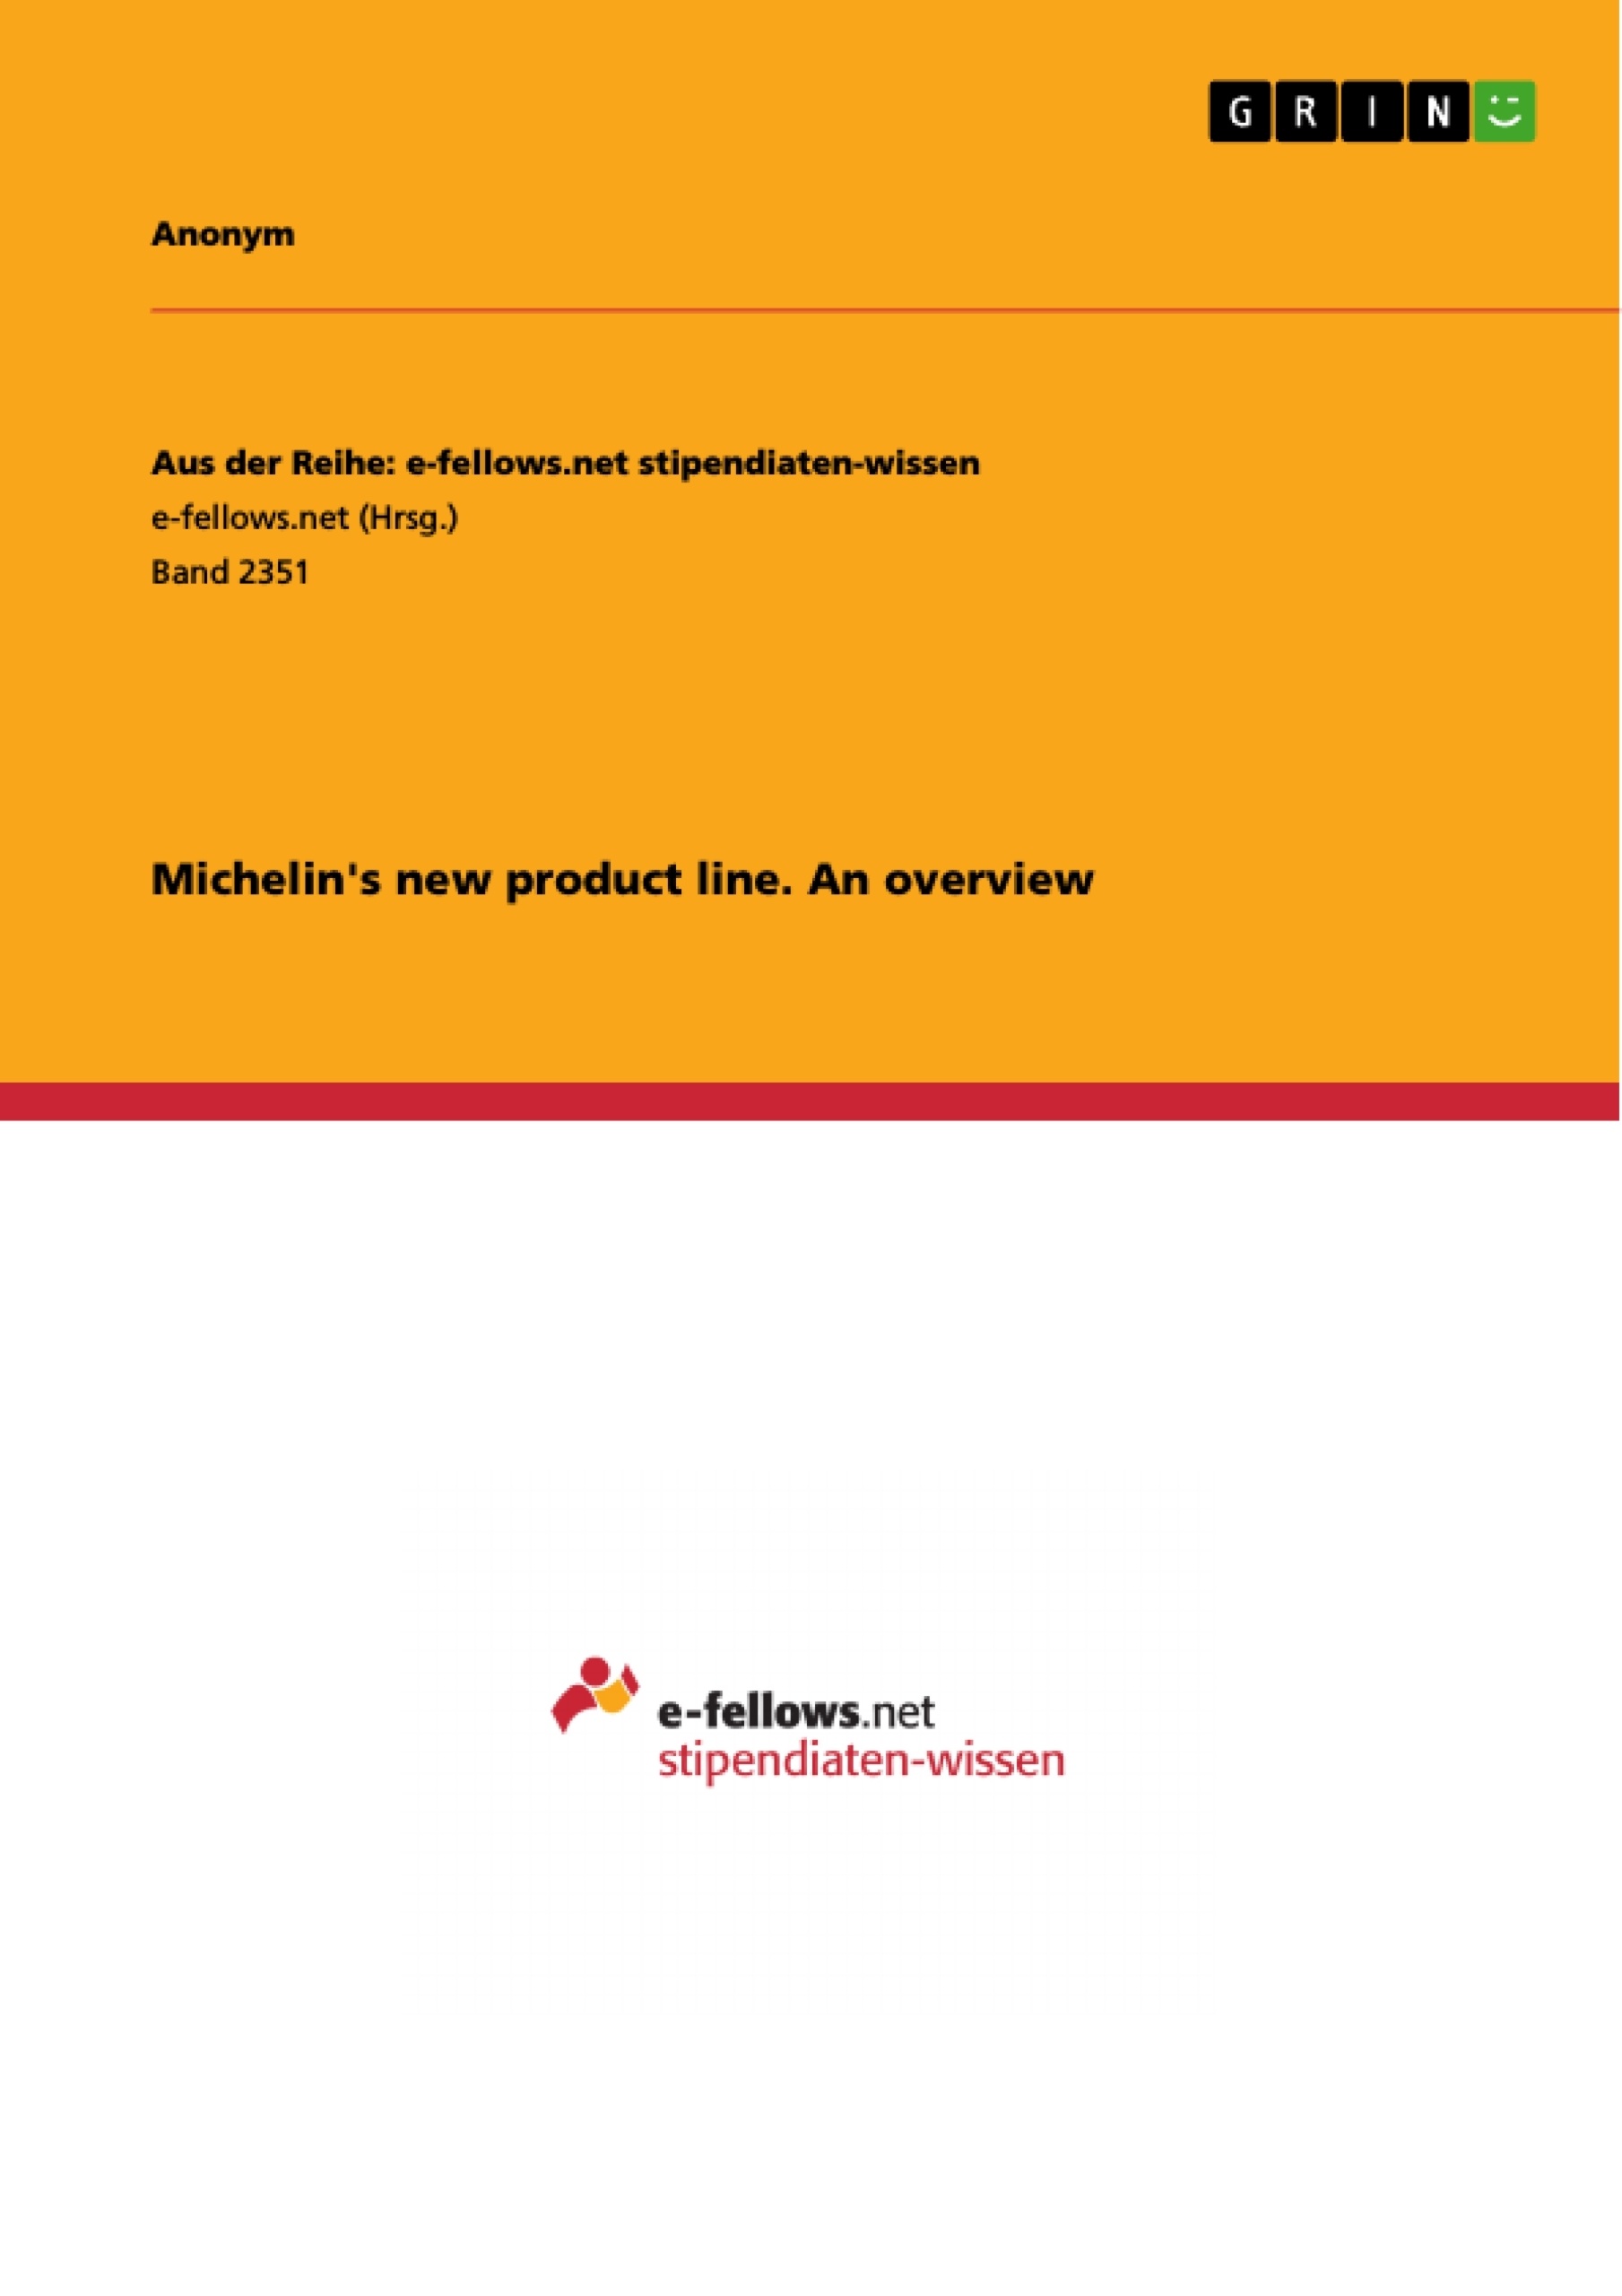 Title: Michelin's new product line. An overview